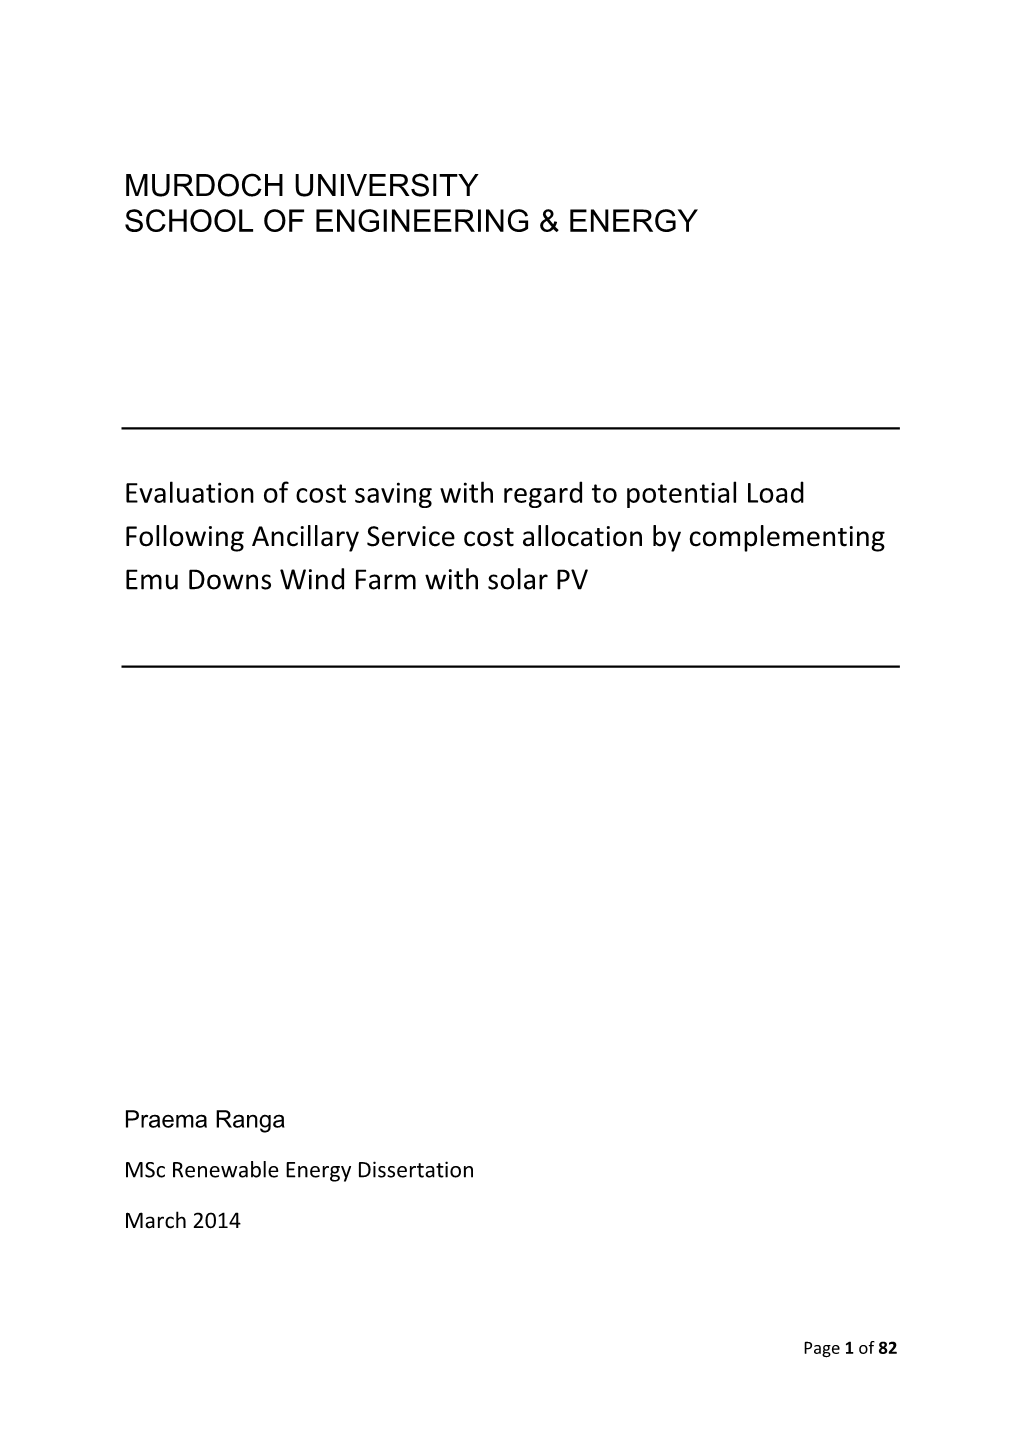 Evaluation of Cost Saving with Regard to Potential Load Following Ancillary Service Cost Allocation by Complementing Emu Downs Wind Farm with Solar PV